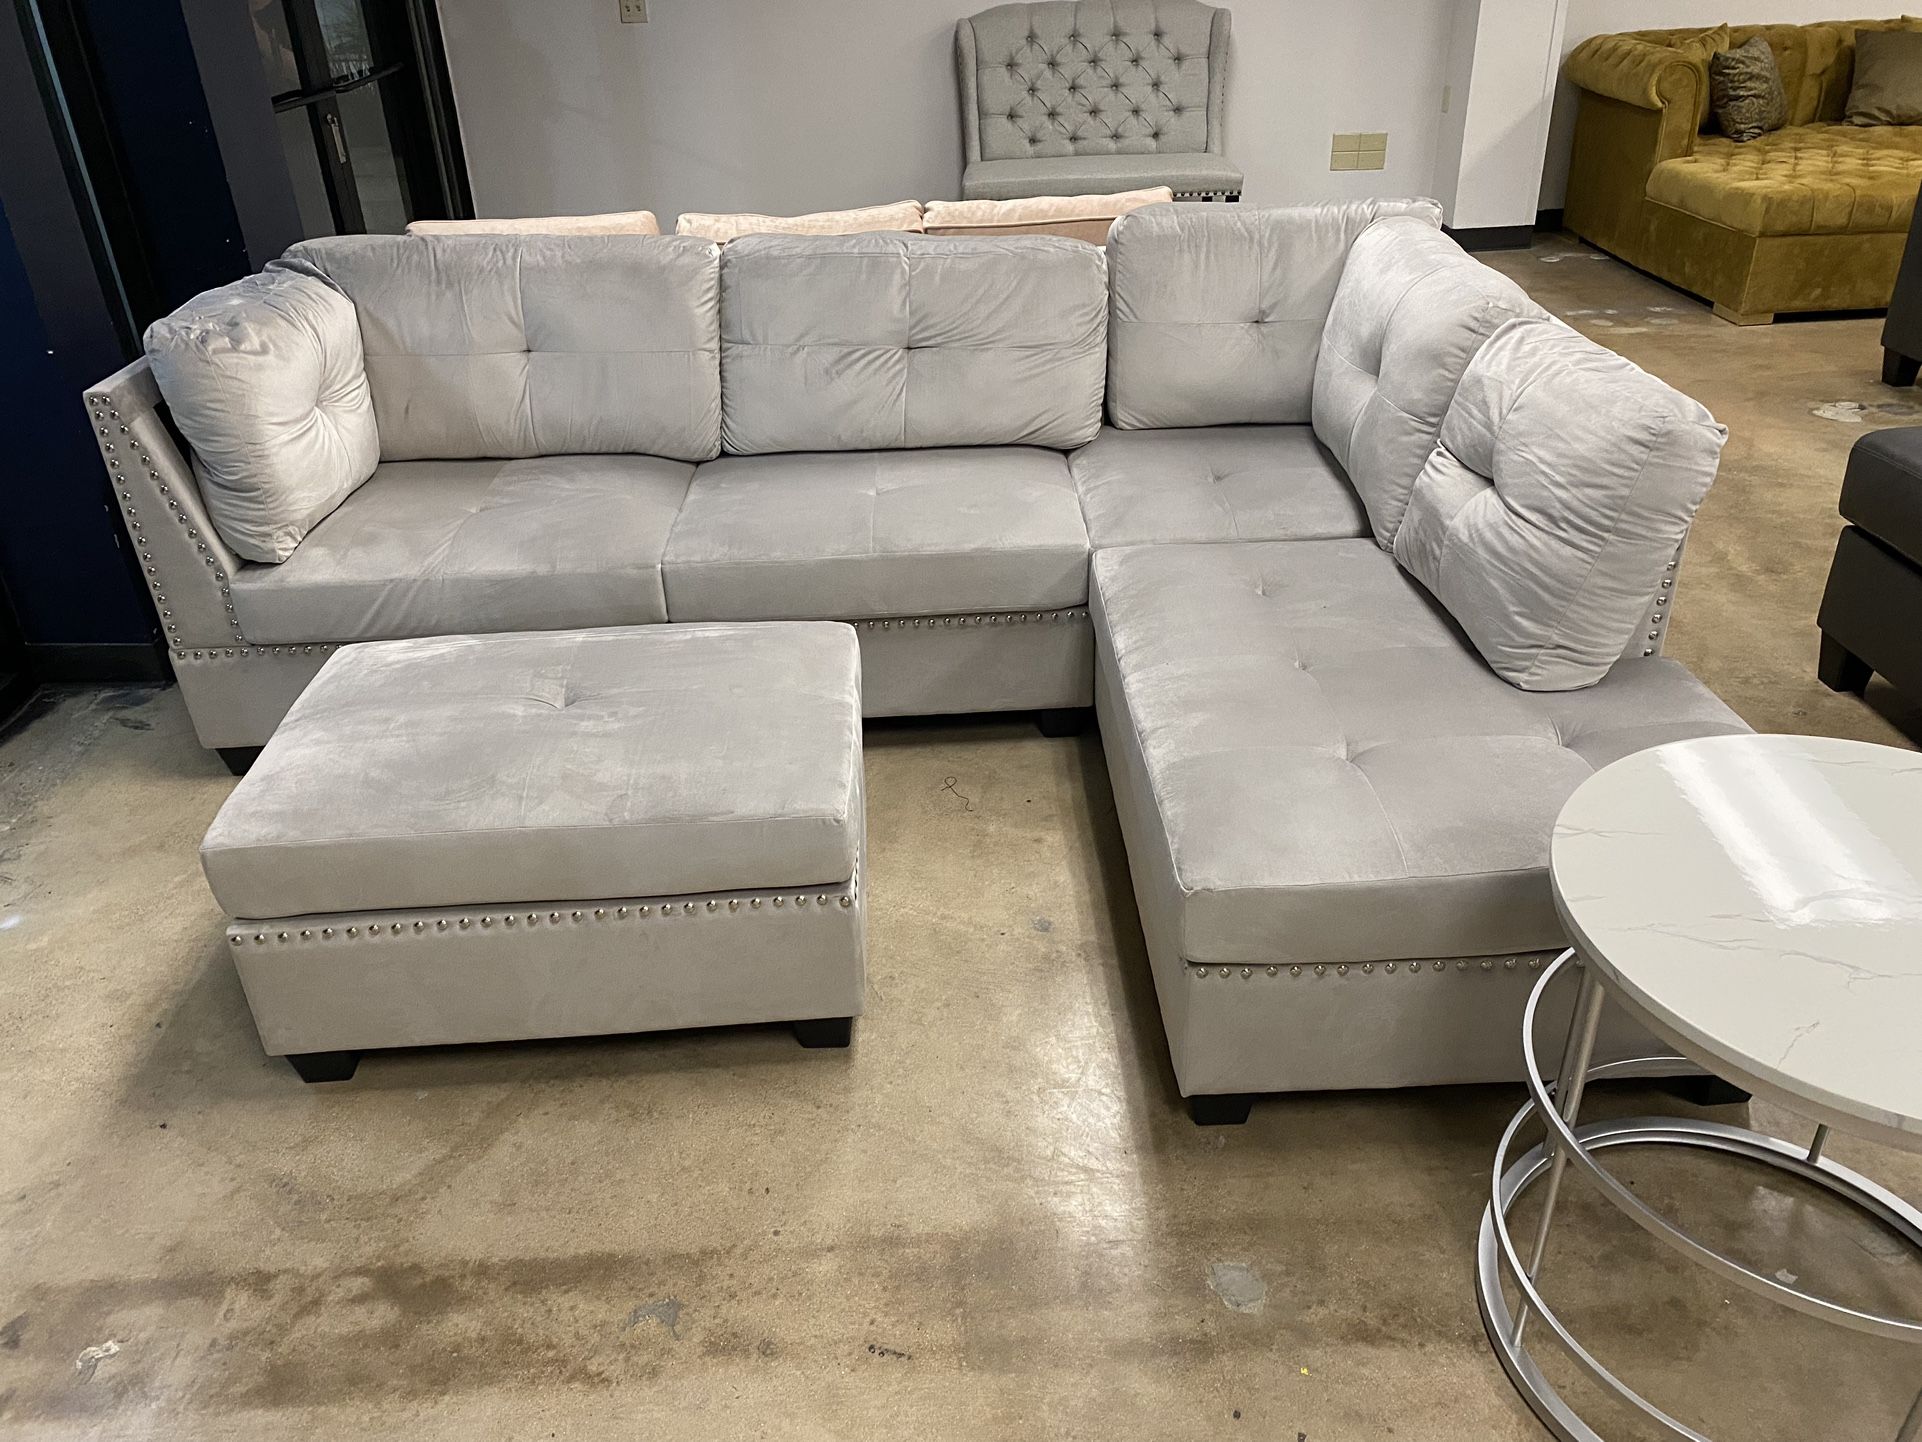 L Shape , Sectional, Sofa, Loveseat, Sleeper Sofa, Chaise, Recliner And Ottoman Options